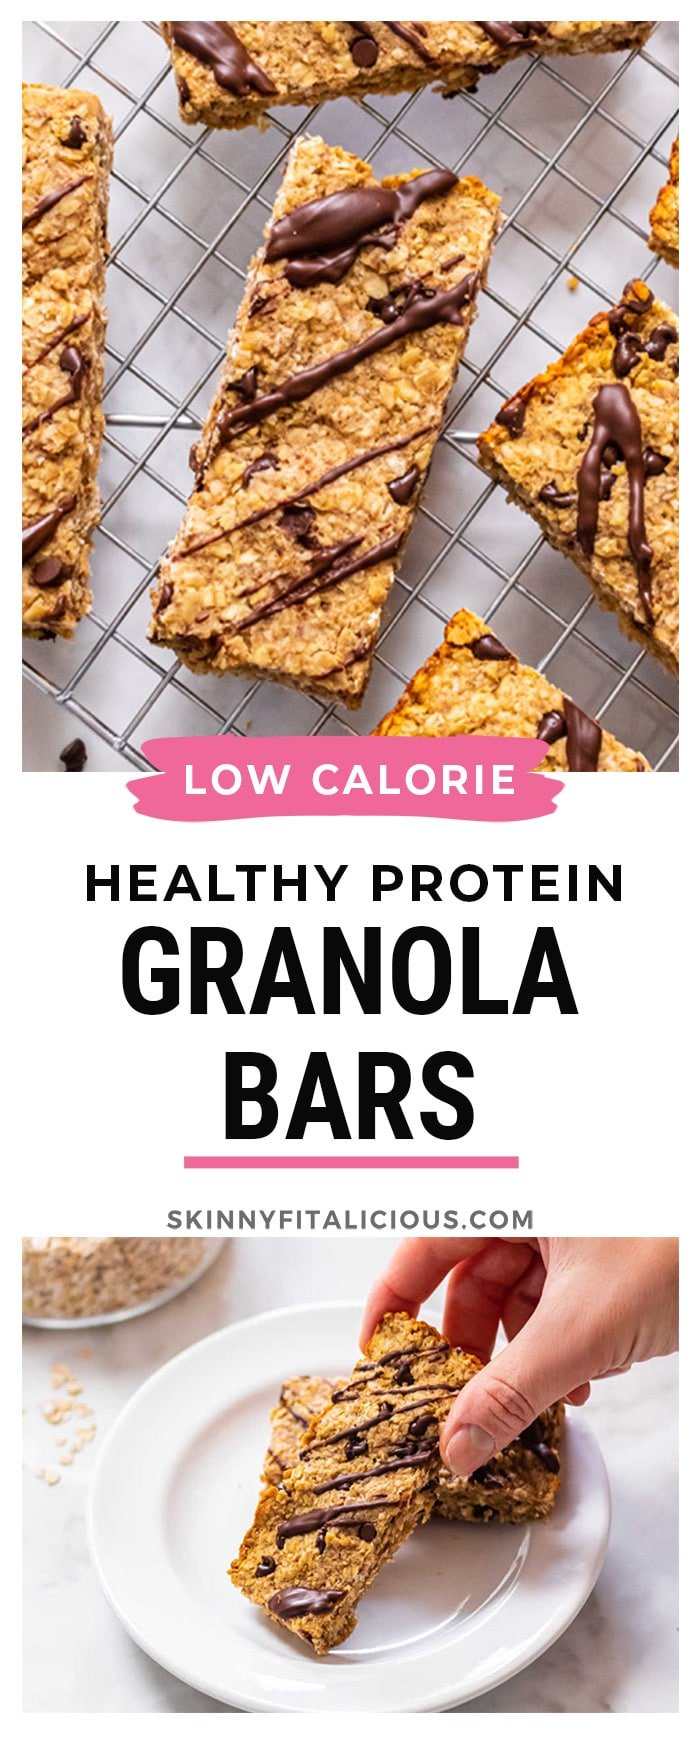 Healthy Protein Granola Bars are low calorie, gluten free and delicious! An easy protein snack that's chewy and healthy.